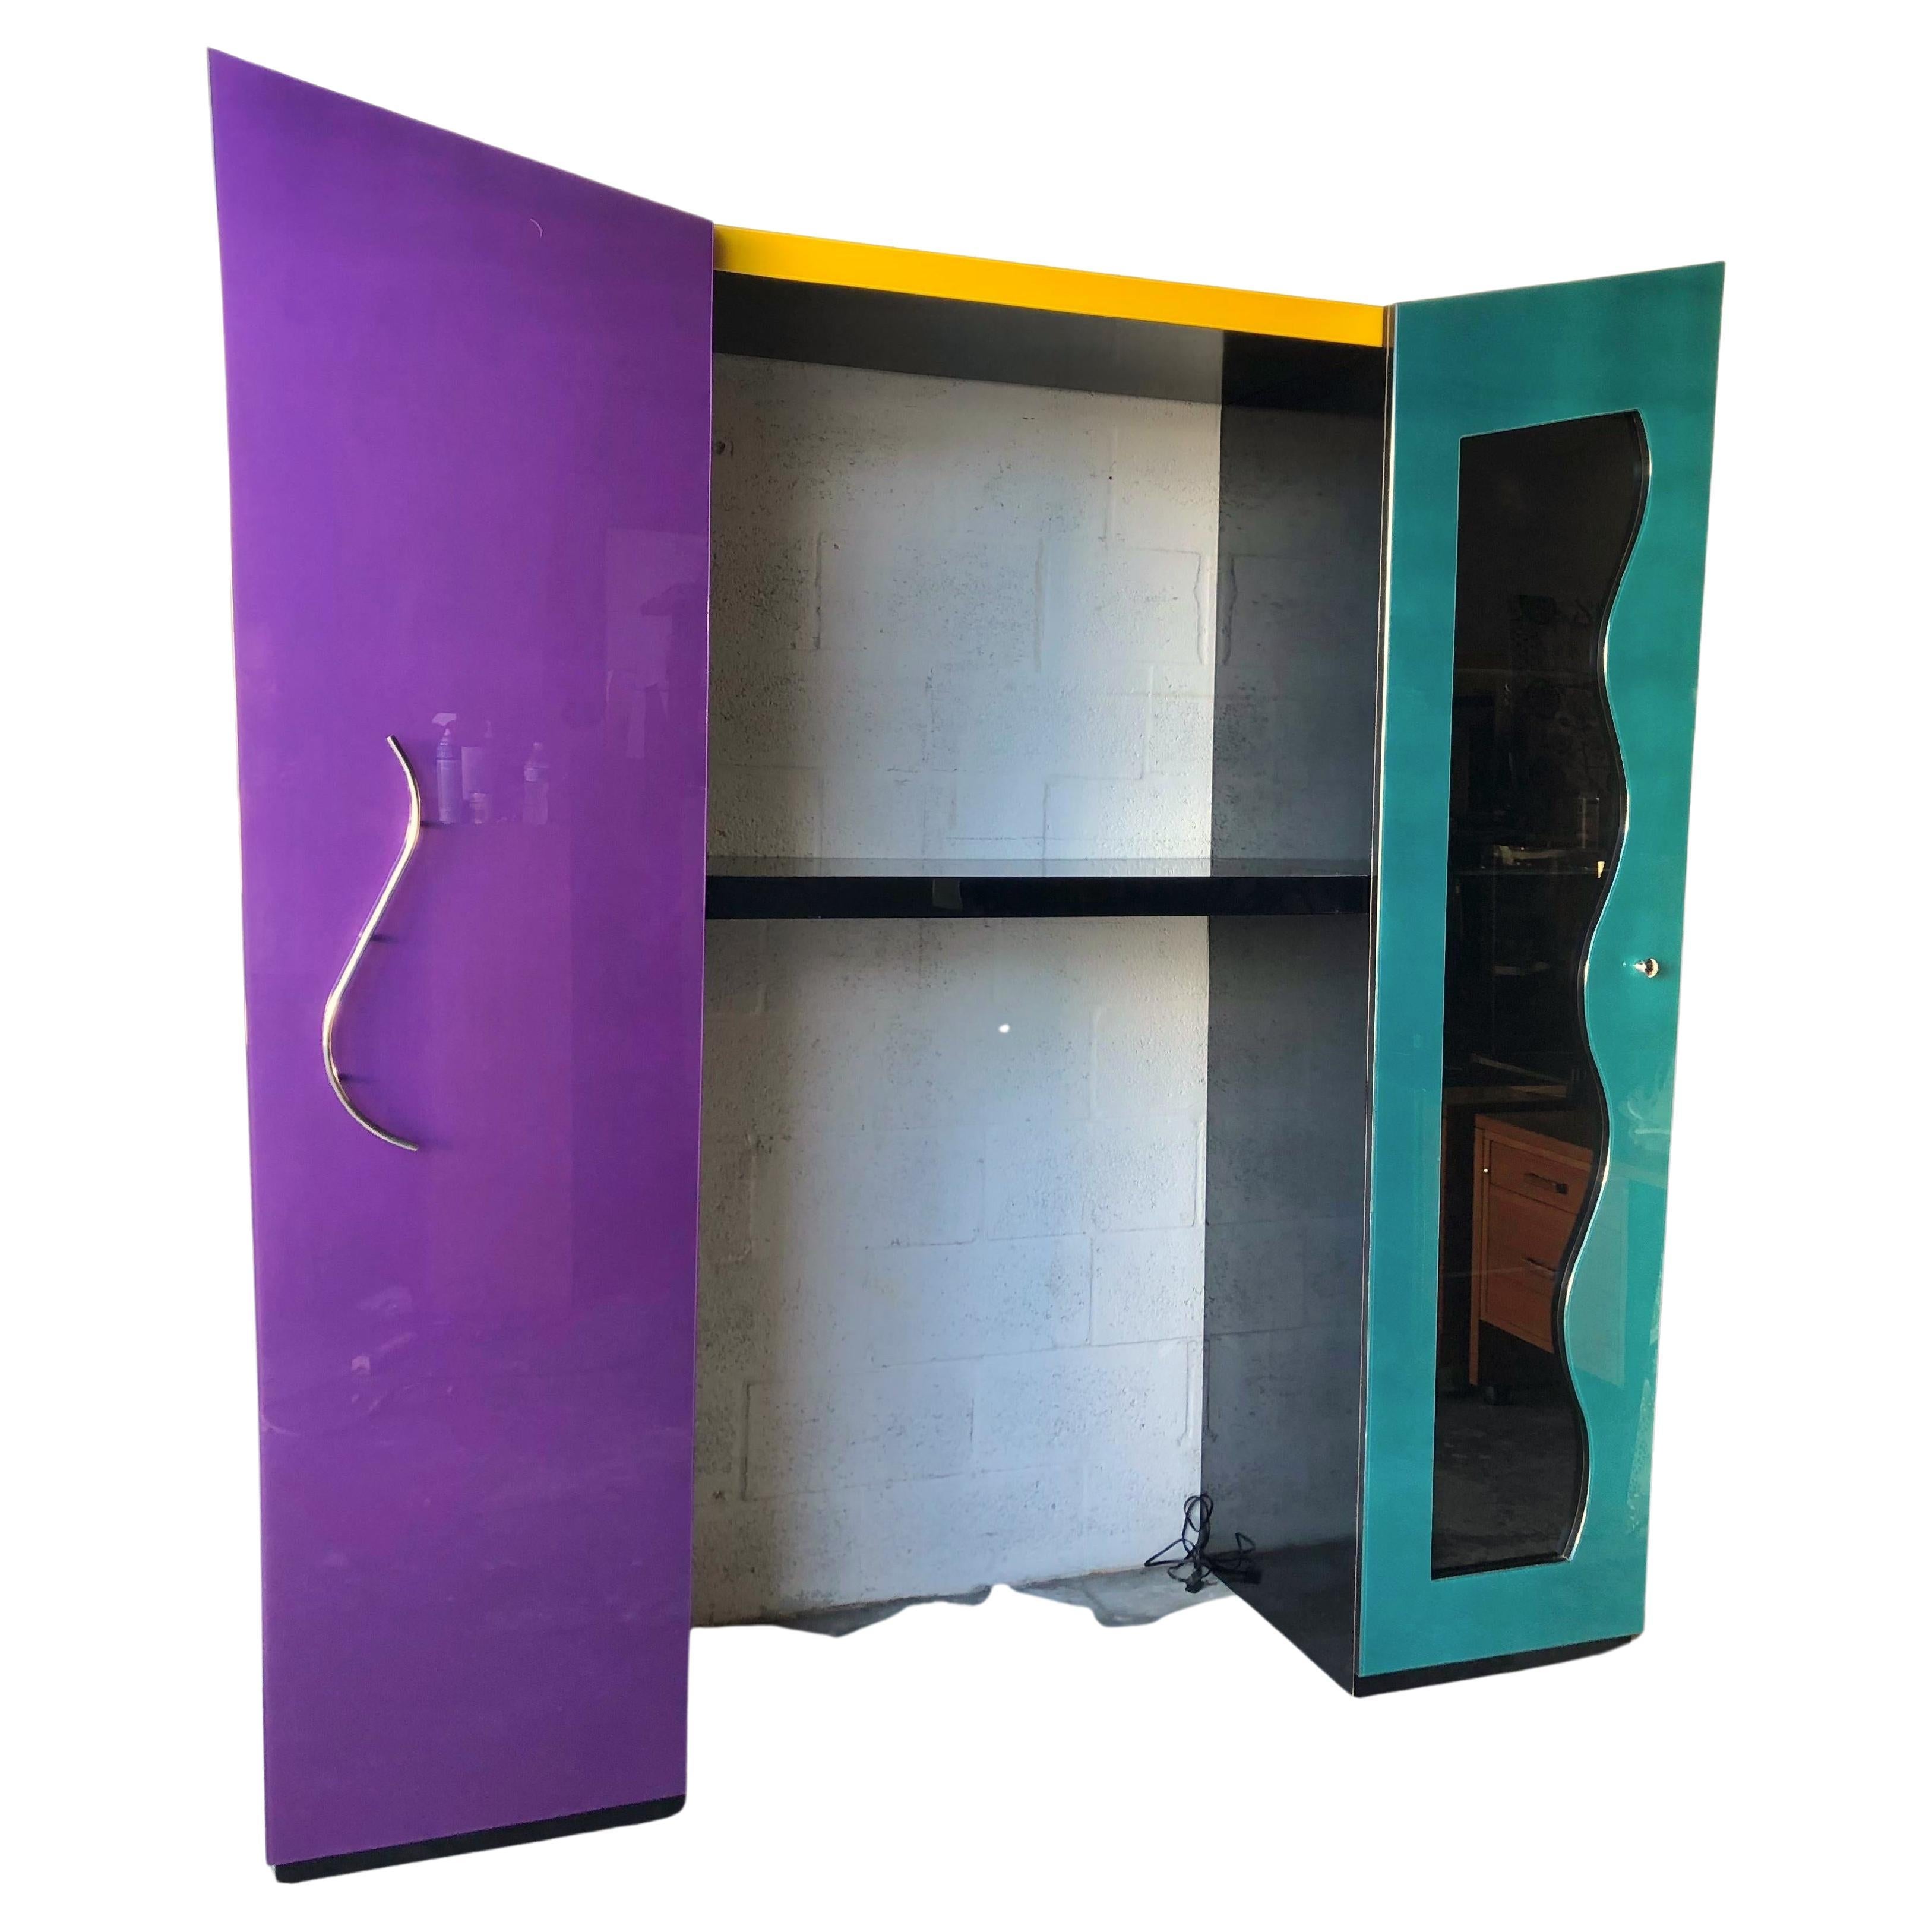 1980s Postmodern Wall System Unit in the Memphis Group Style For Sale